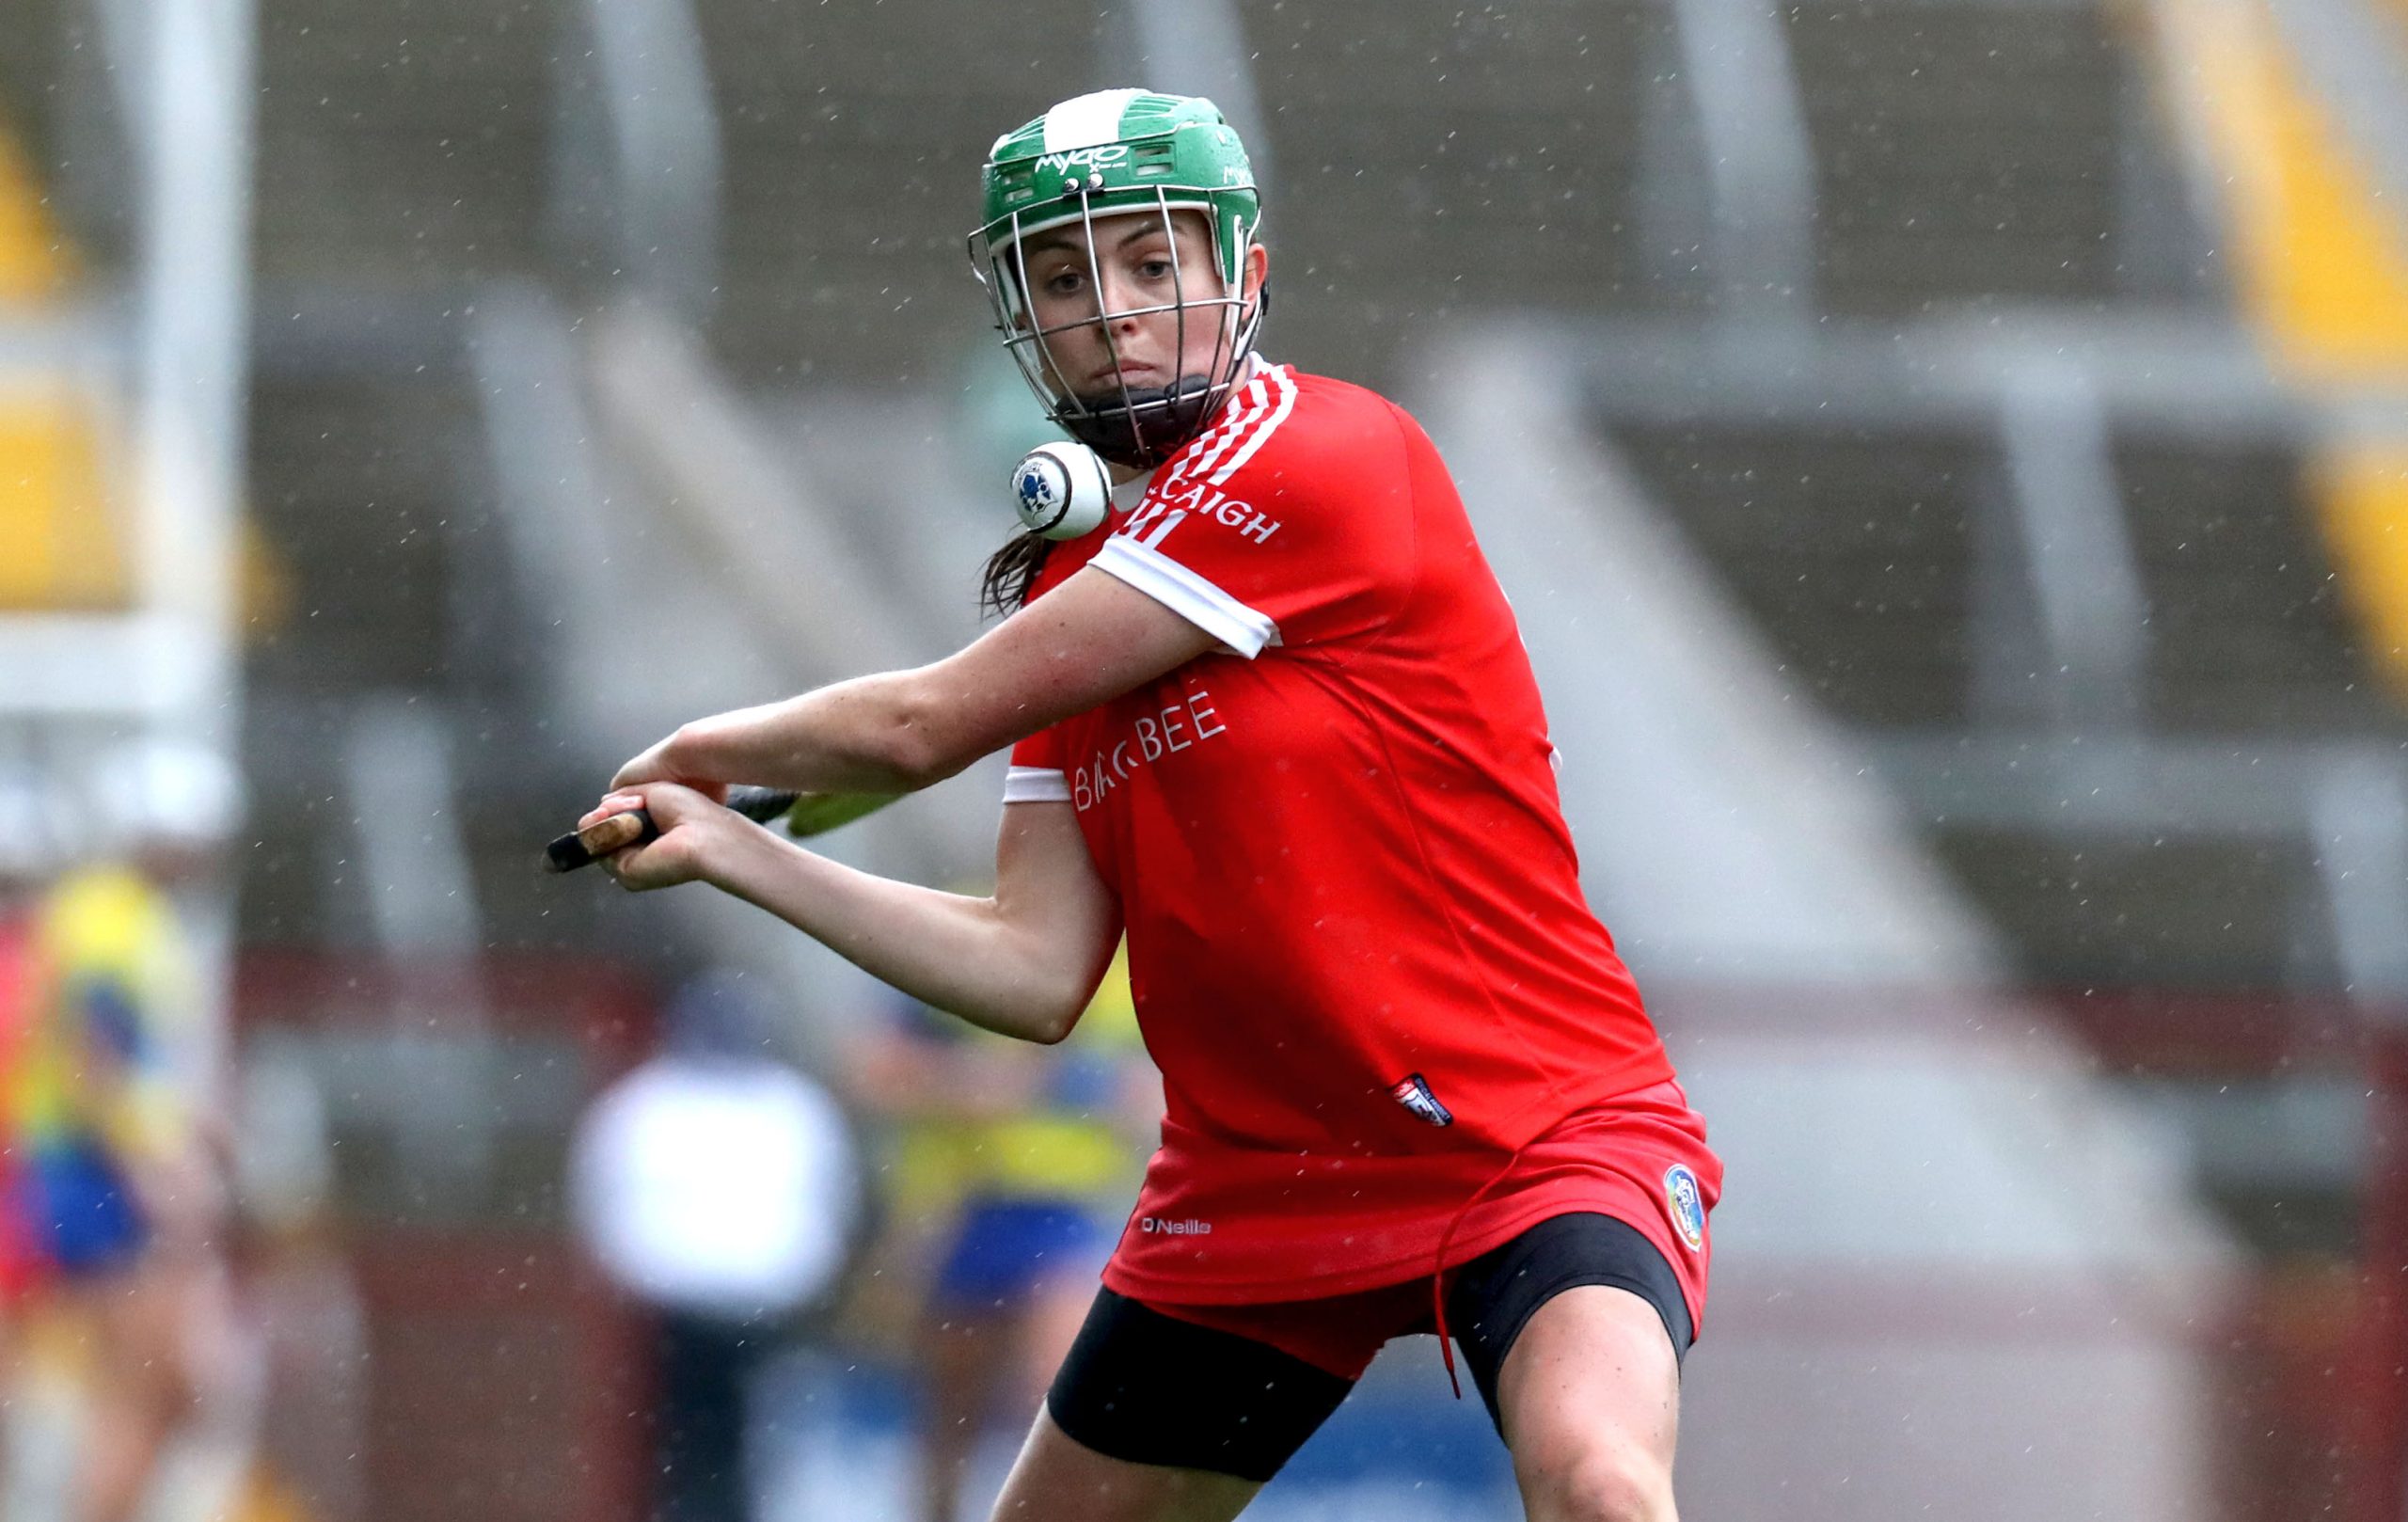 “We don’t fear what comes next” – Cork’s Hannah Looney